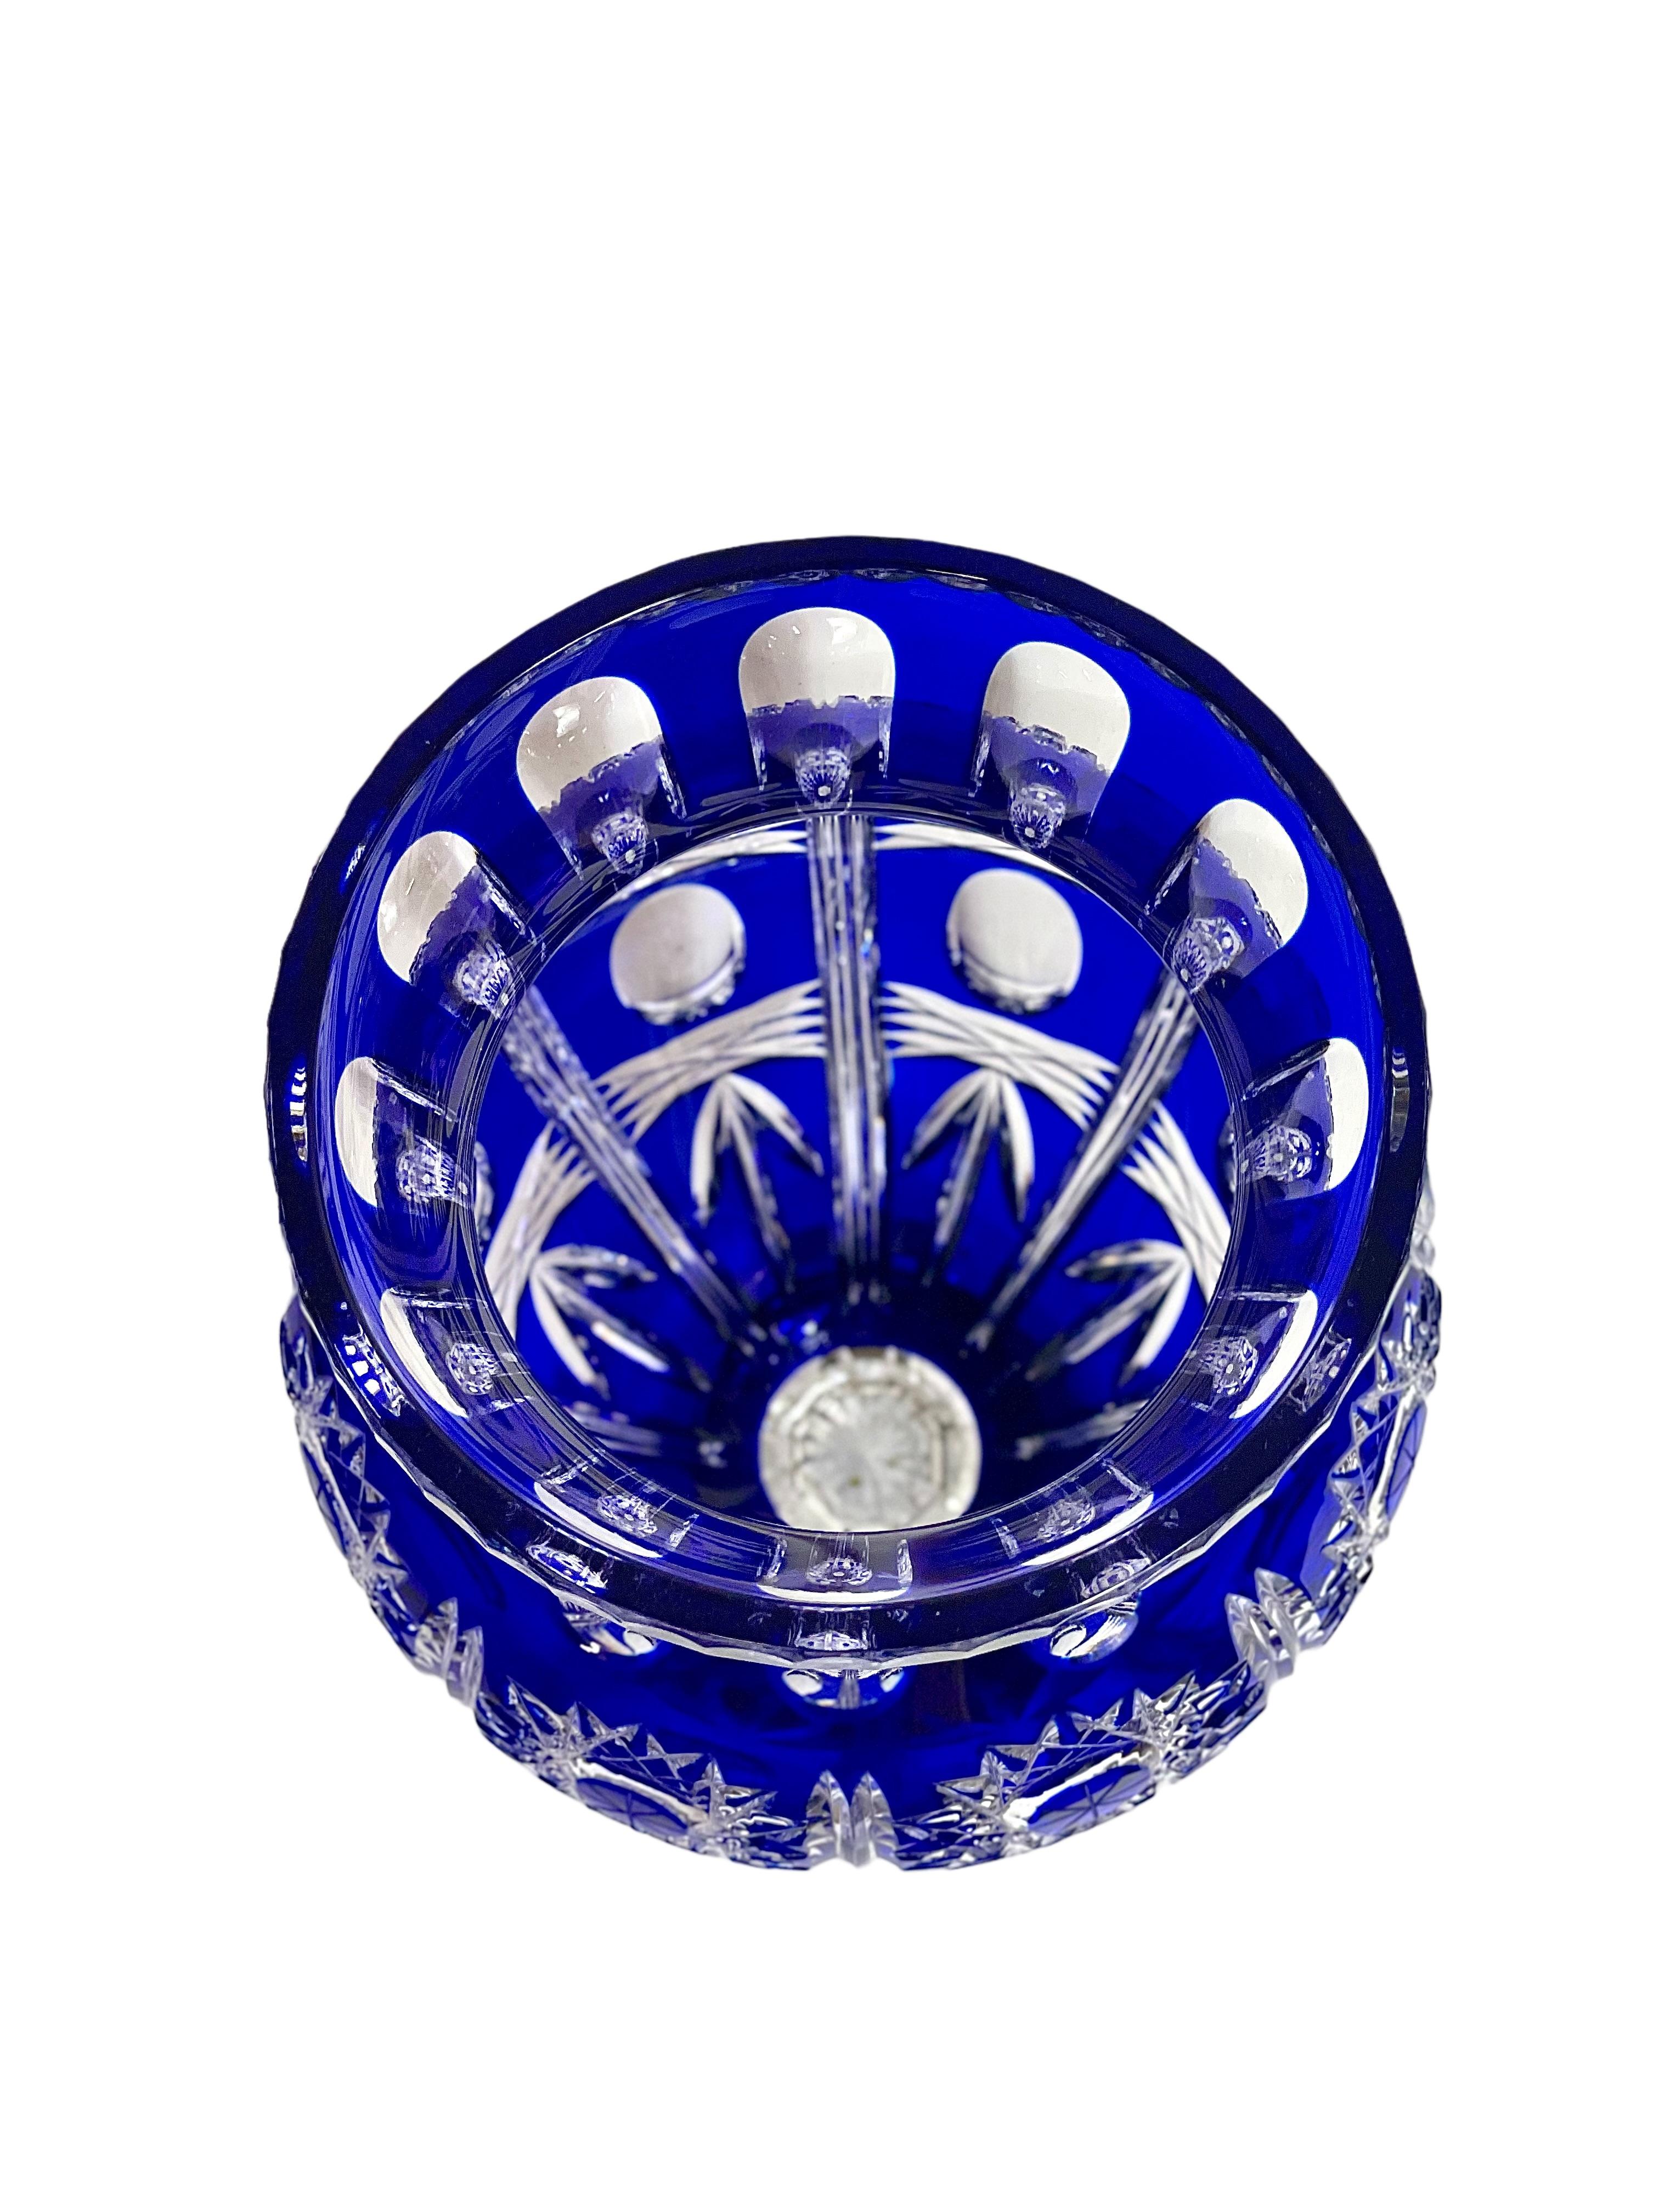 This impressive Etzel crystal vase in cobalt-blue overlay is from the famous Compagnie des Cristalleries de Saint Louis in Lorraine, the oldest glass manufacturer in France, dating back to 1586. Hand-cut with sun motifs, oval lozenges with bevelled